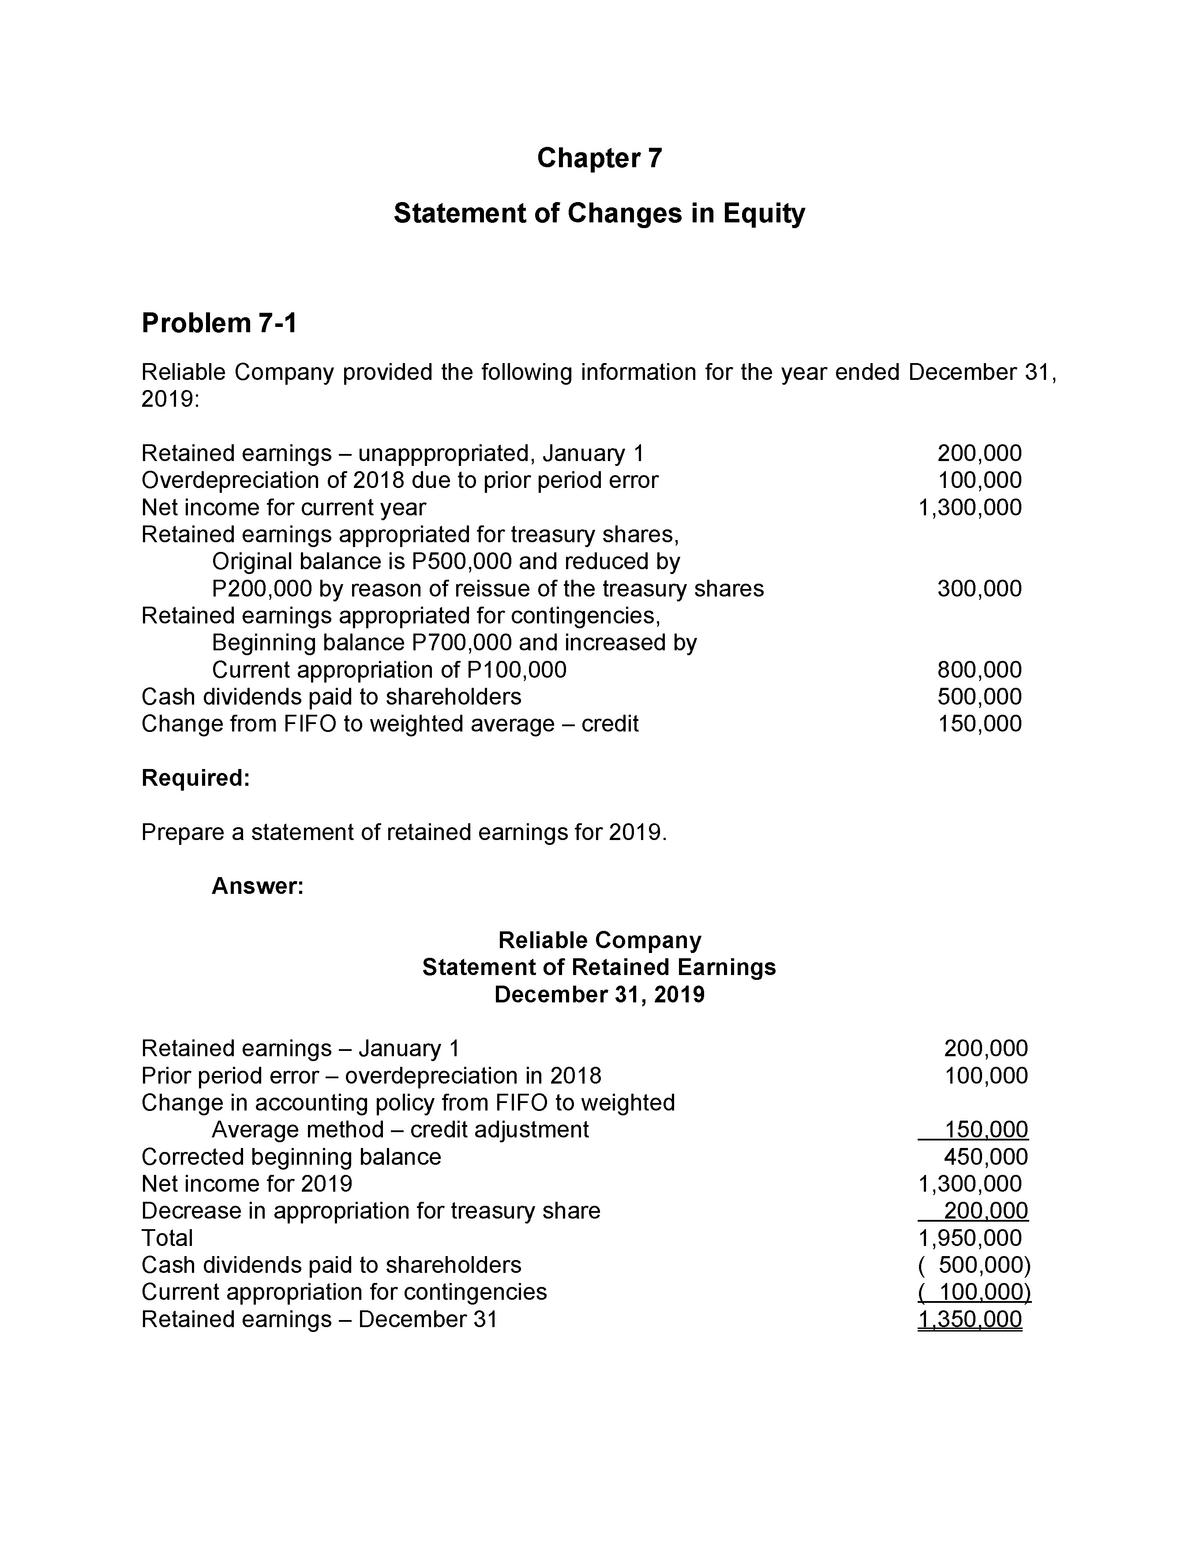 changes-in-owners-equity-chapter-7-statement-of-changes-in-equity